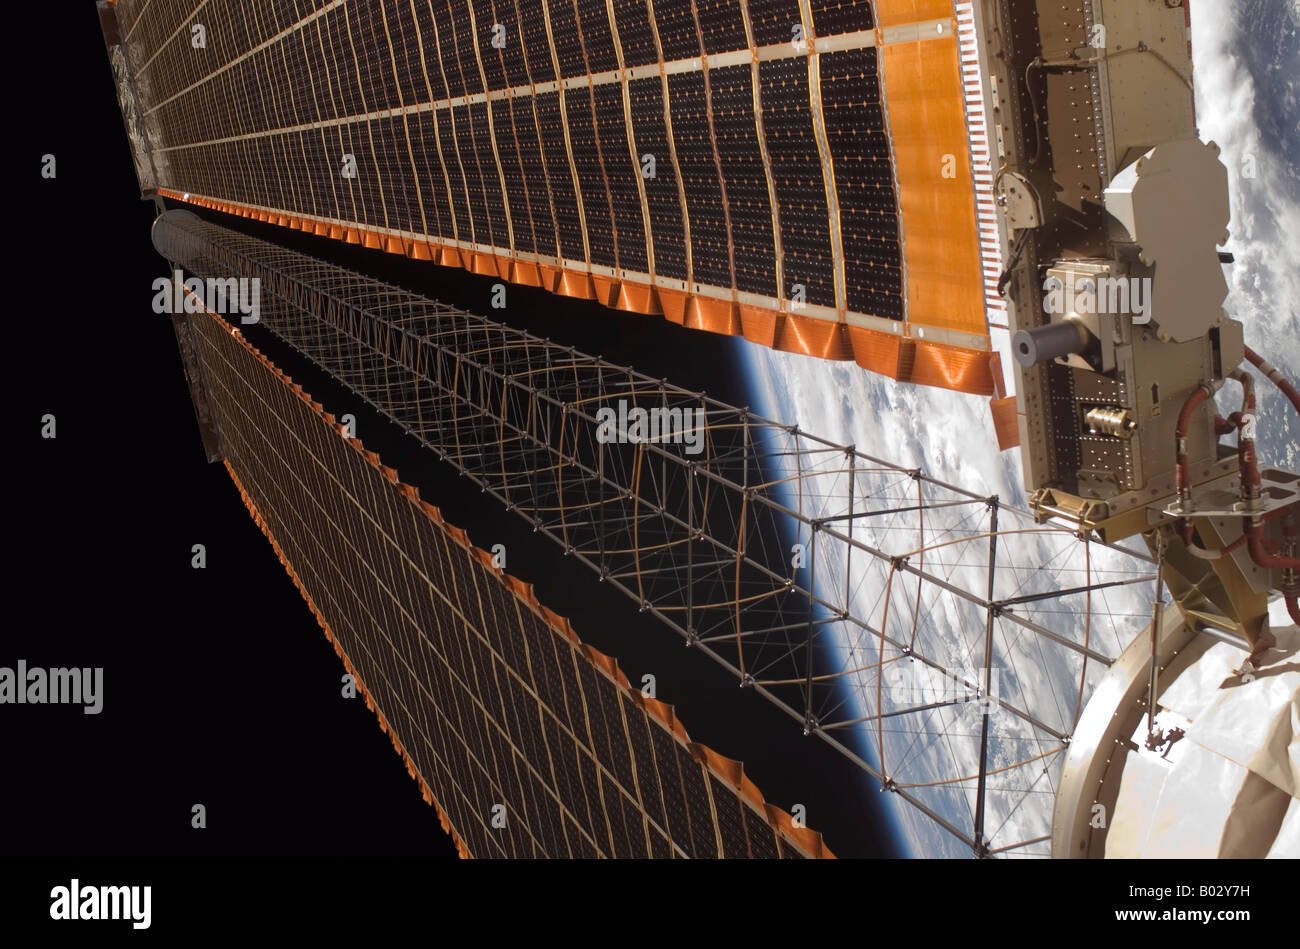 A solar array wing on the International Space Station. Stock Photo